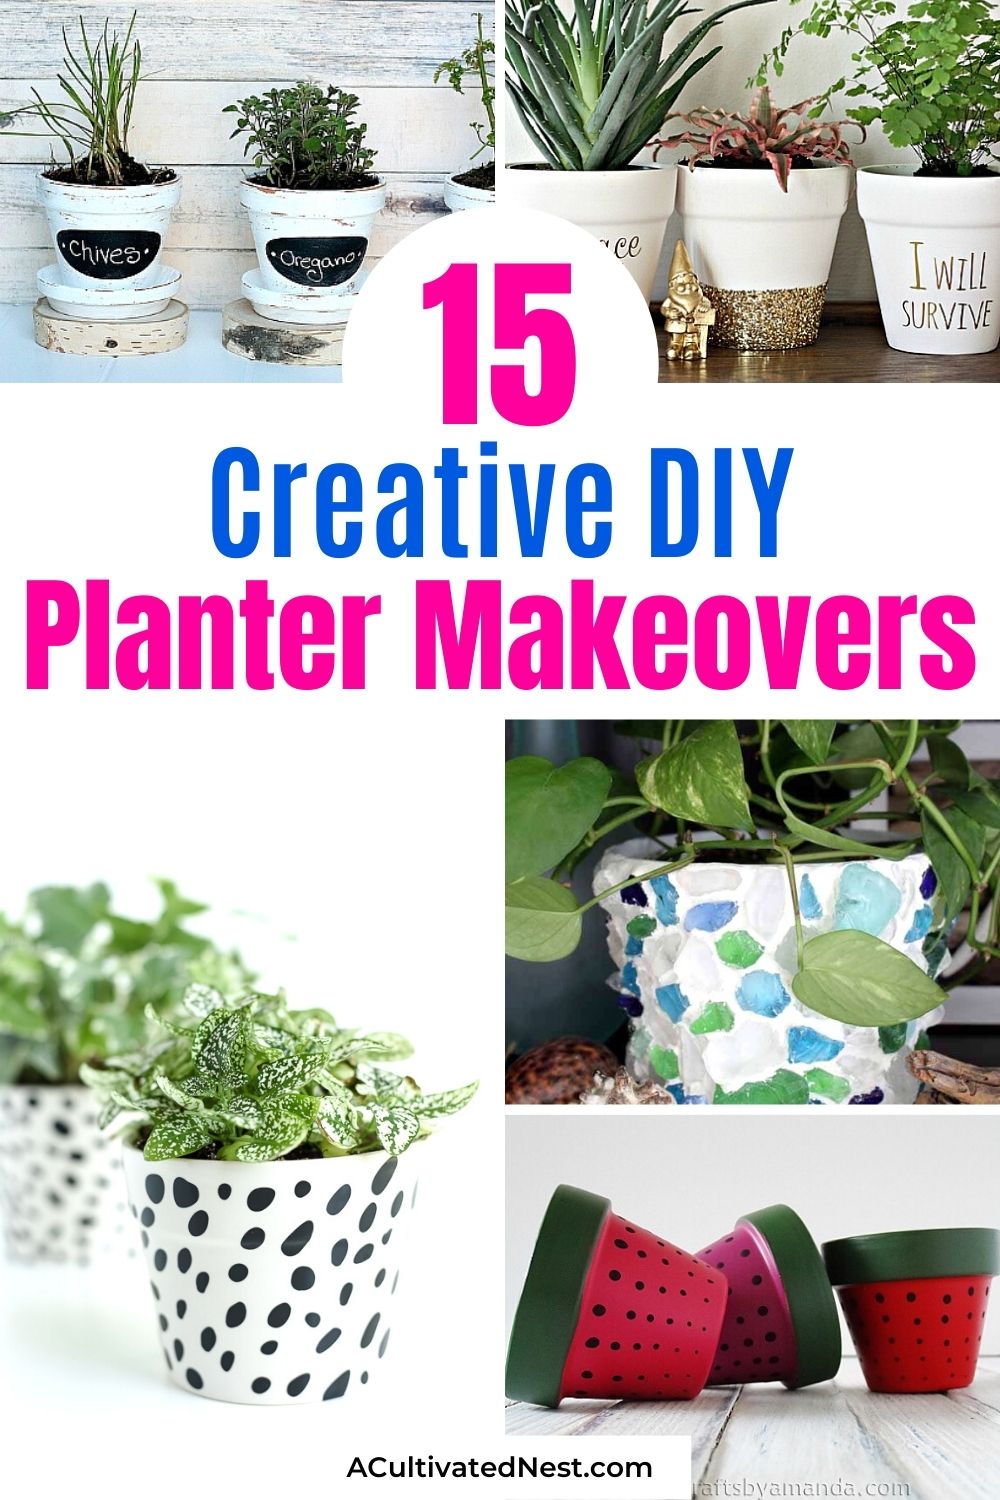 15 Creative DIY Planter Makeovers- If you have a potted garden or are planning to give flowers as a gift, these DIY planter makeovers should be very helpful! There are so many cute planter craft ideas you can try! | #DIY #craftIdeas #diyProjects #gardenPlanter #ACultivatedNest